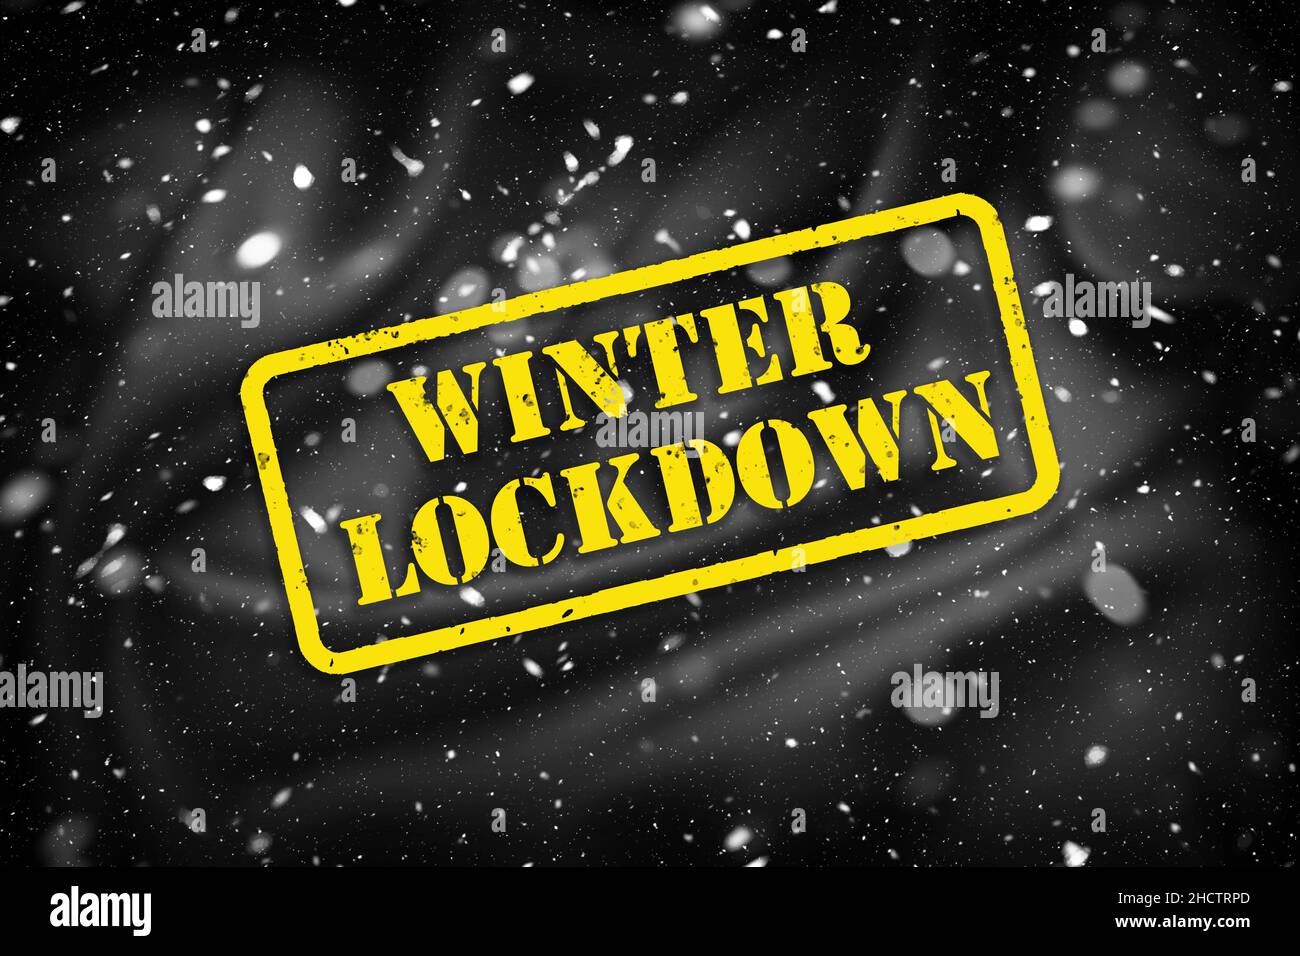 Winter lockdown text on snowy abstract background, Illustration of Covid-19 pandemic. Stock Photo